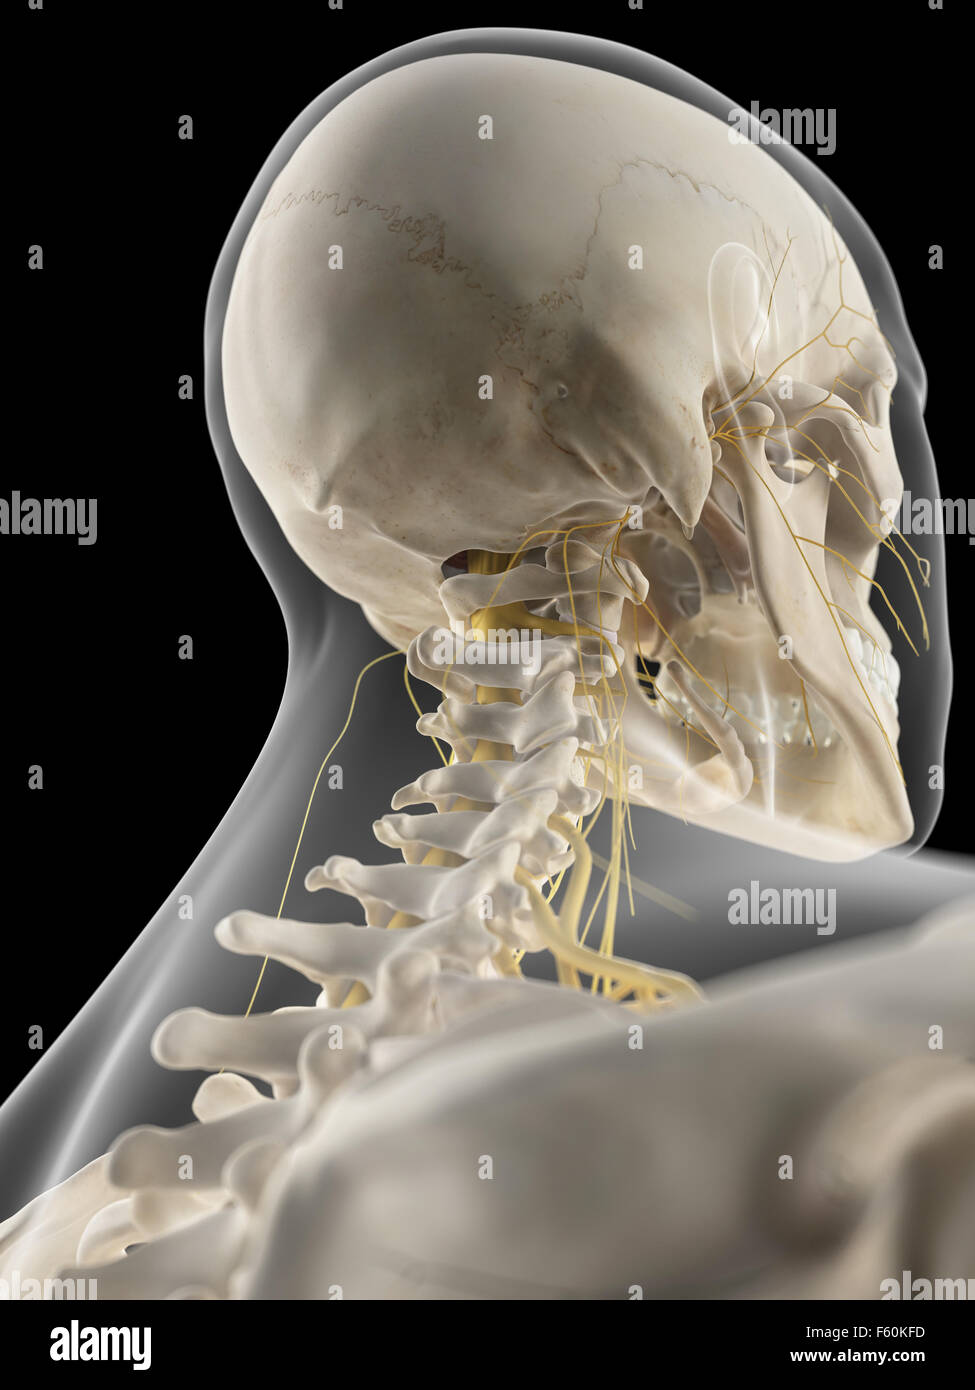 Medically Accurate Illustration Of The Cervical Nerves Stock Photo Alamy